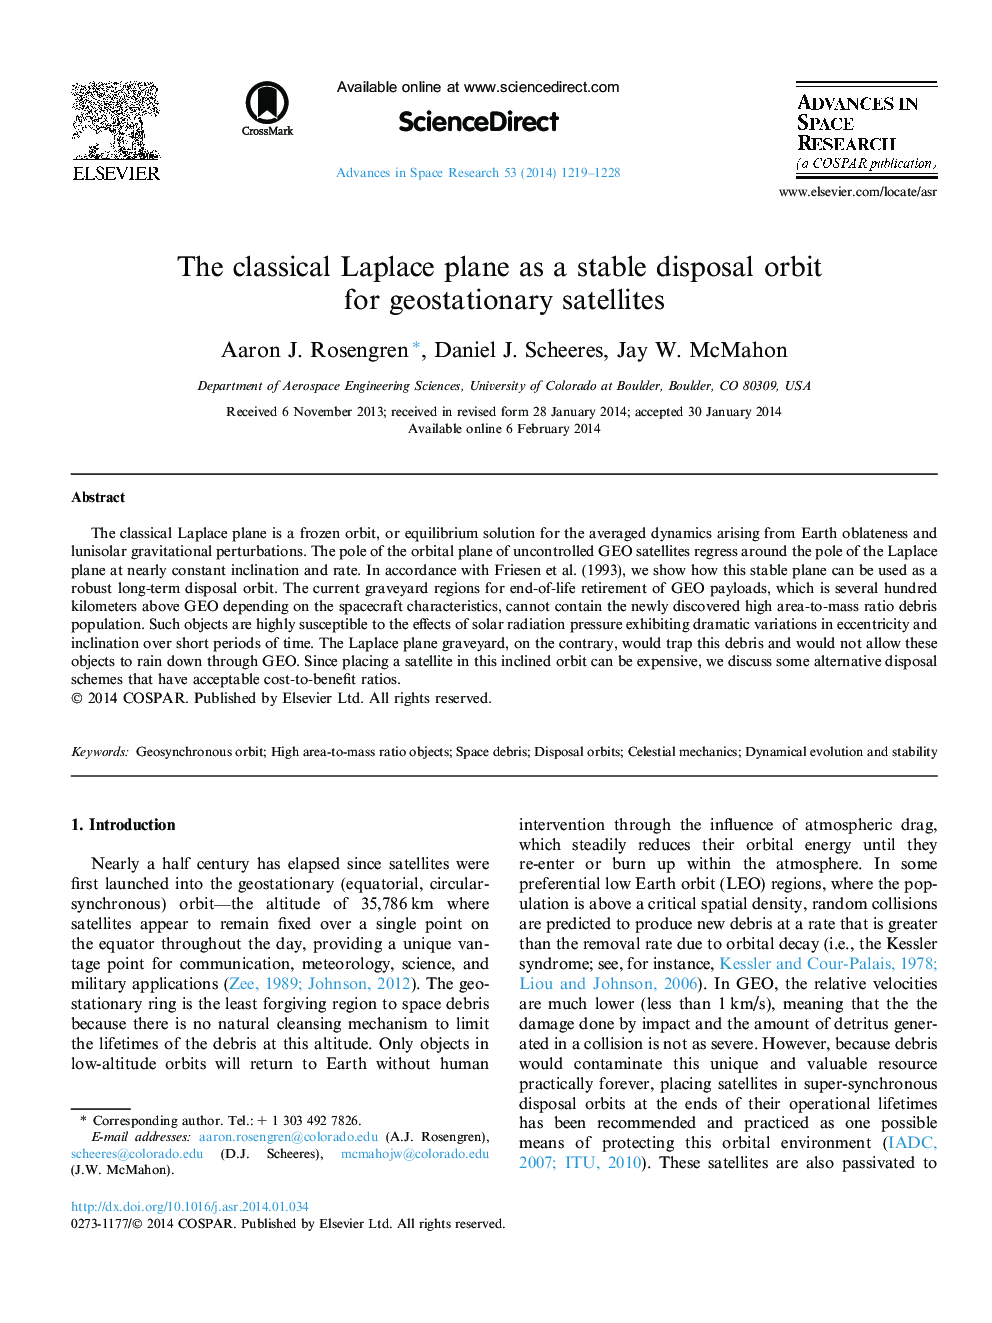 The classical Laplace plane as a stable disposal orbit for geostationary satellites